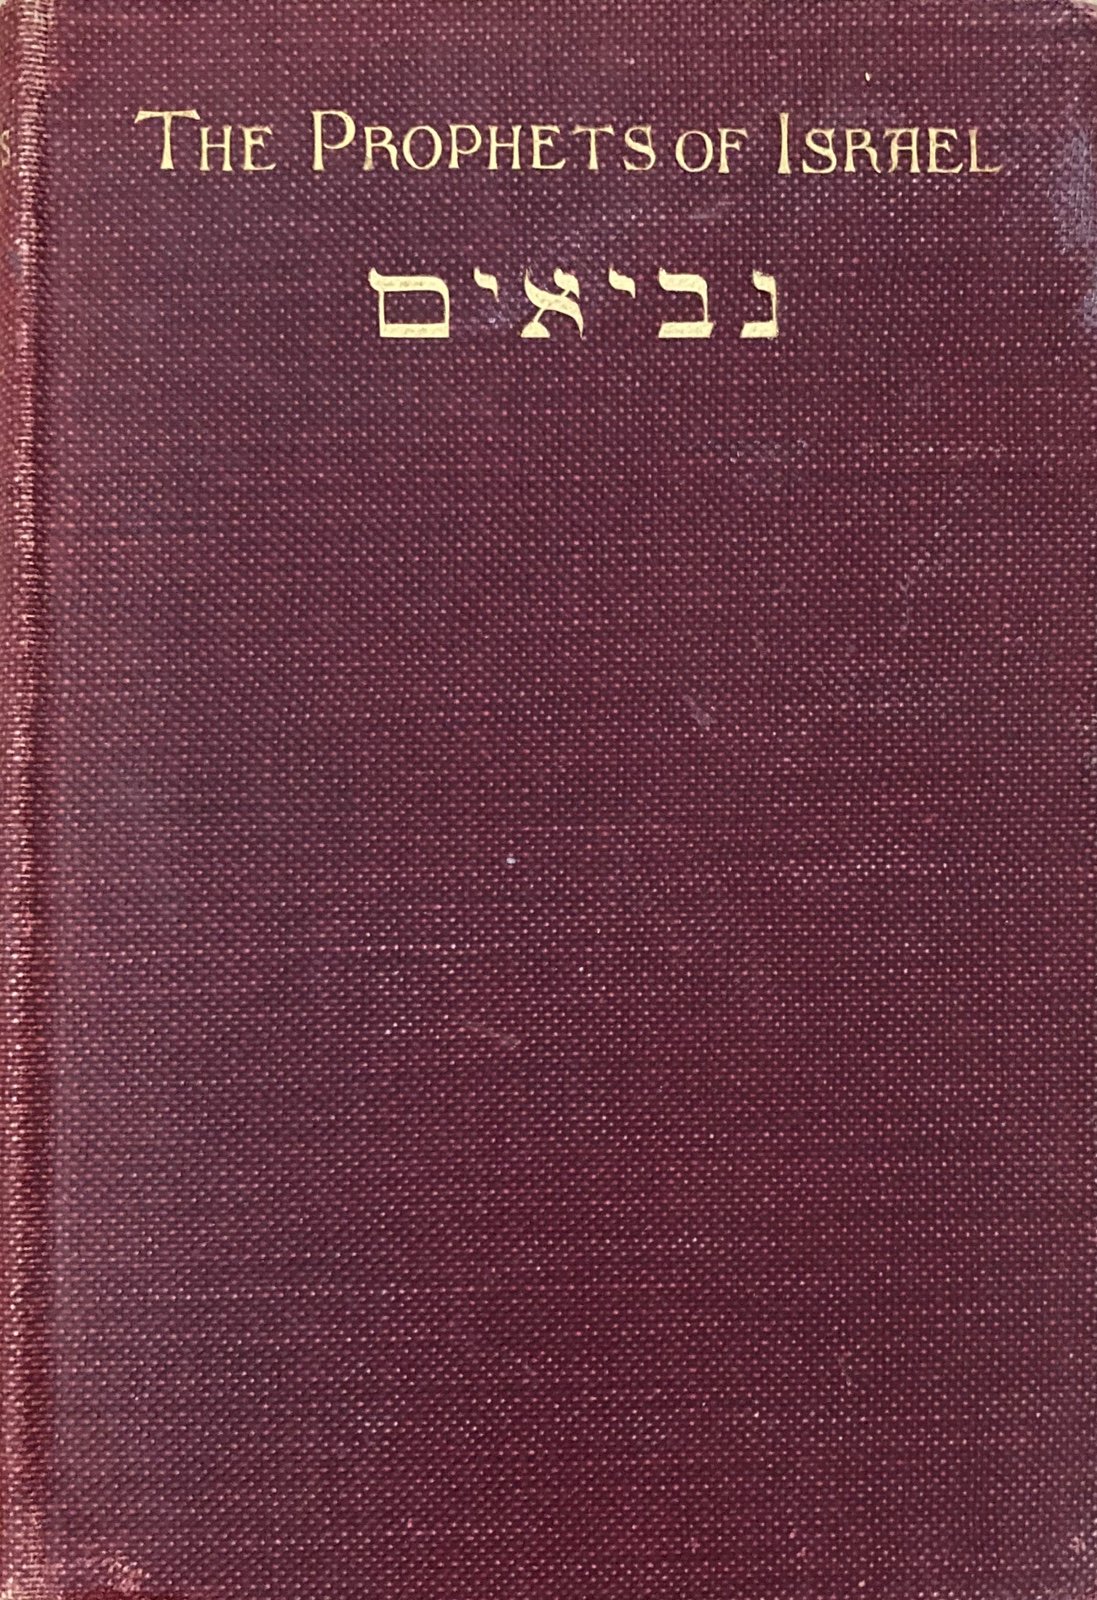 The Prophets of Israel Old Testament History by Carl Cornill 11th Ed 1917 ka0YGose4